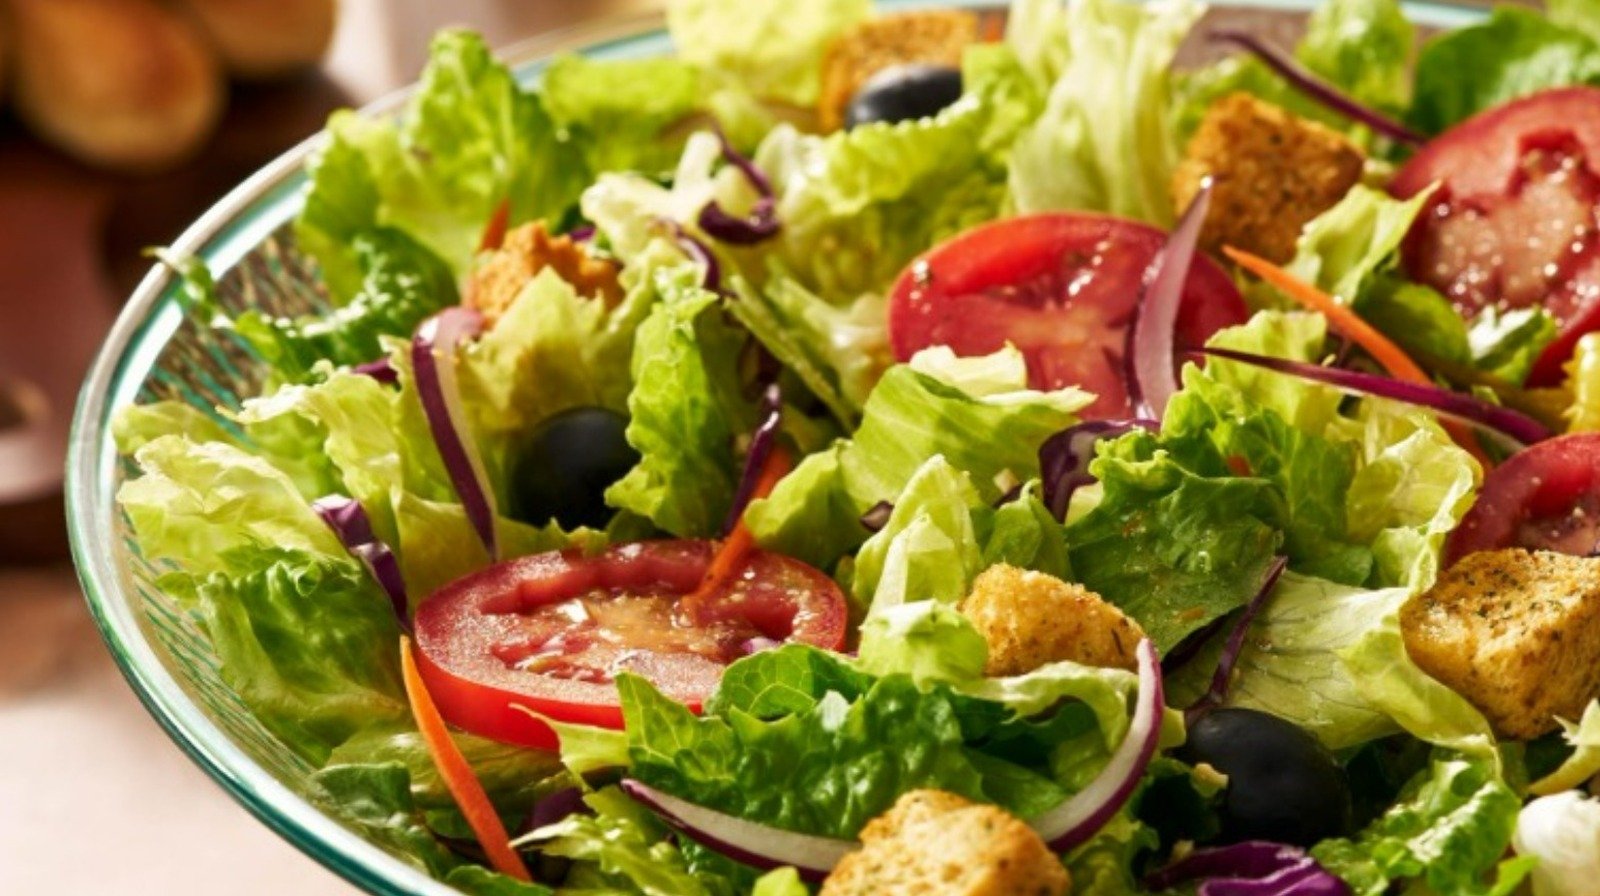 Nearly 46% Think This Chain Restaurant Has The Best Salads